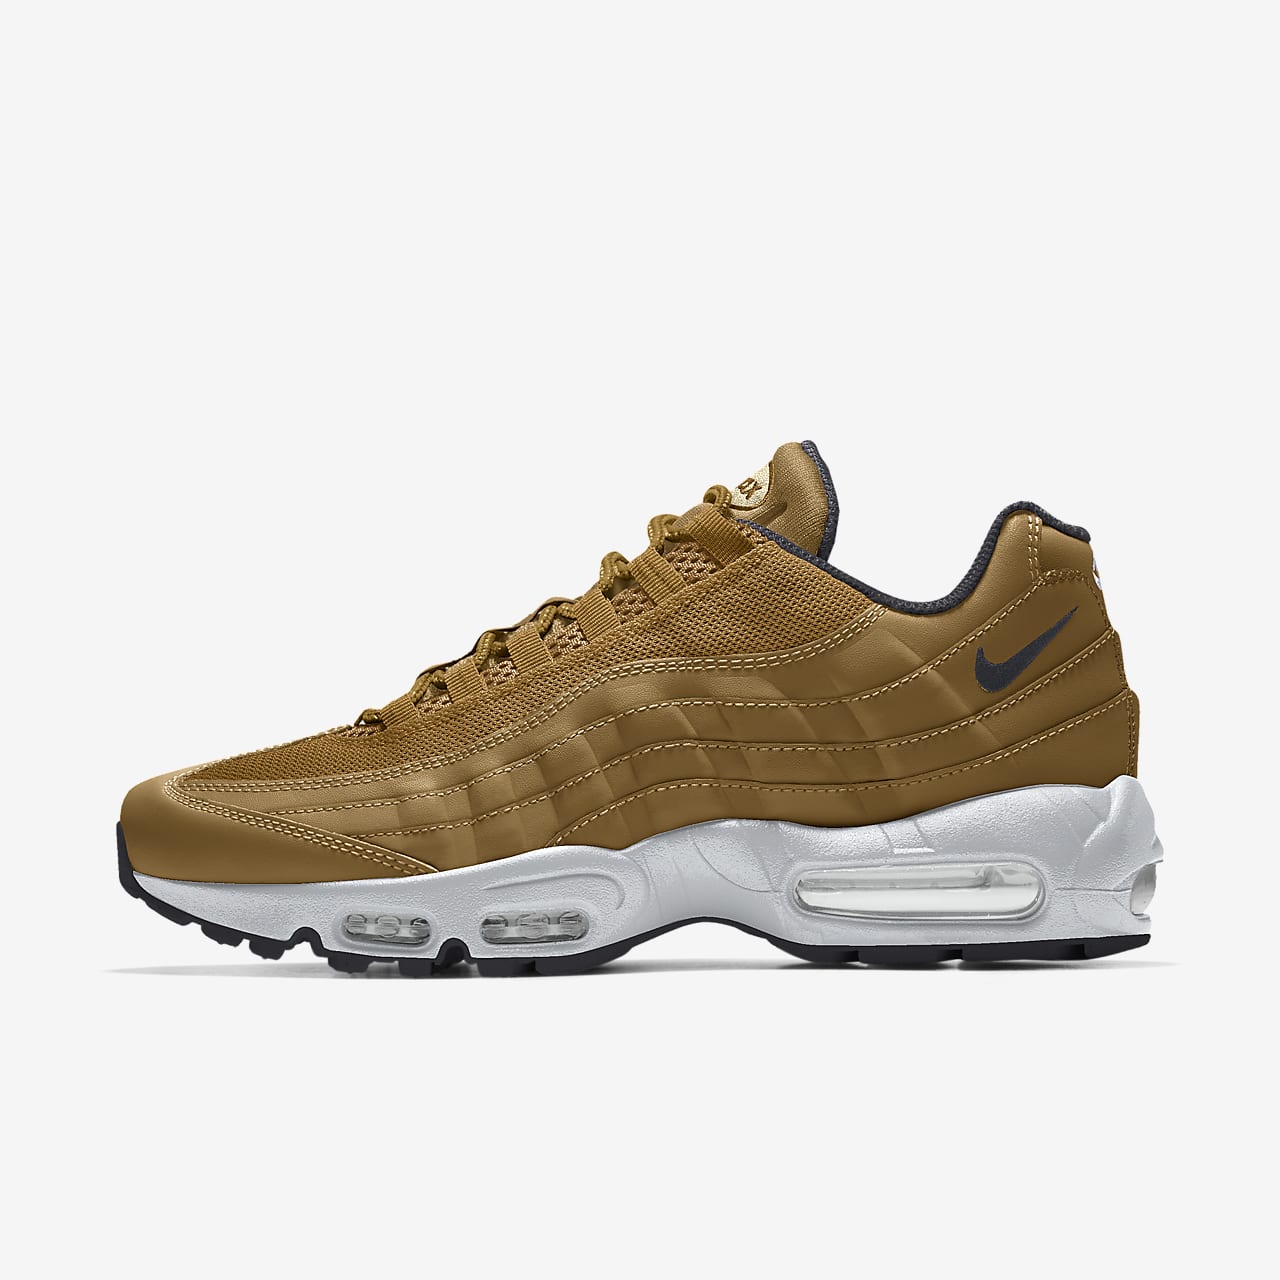 Scarpa personalizzabile Nike Air Max 95 By You - Donna